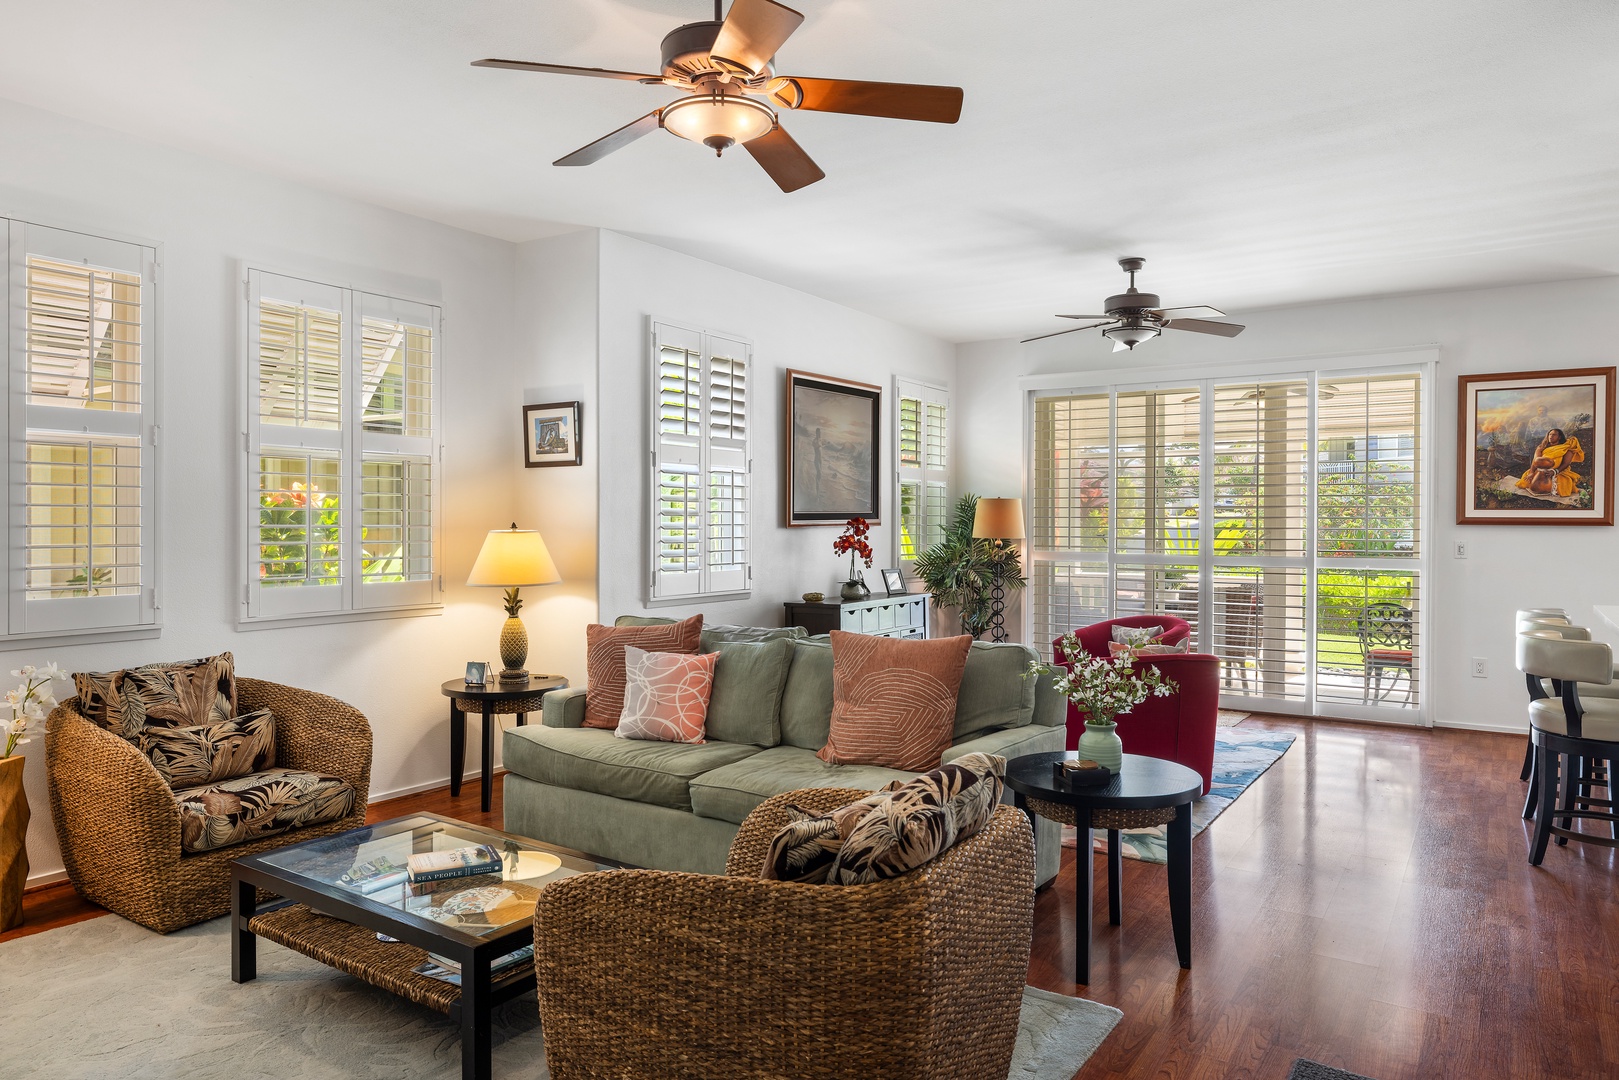 Kapolei Vacation Rentals, Coconut Plantation 1190-1 - An open-concept living space for seamless flow and connection.